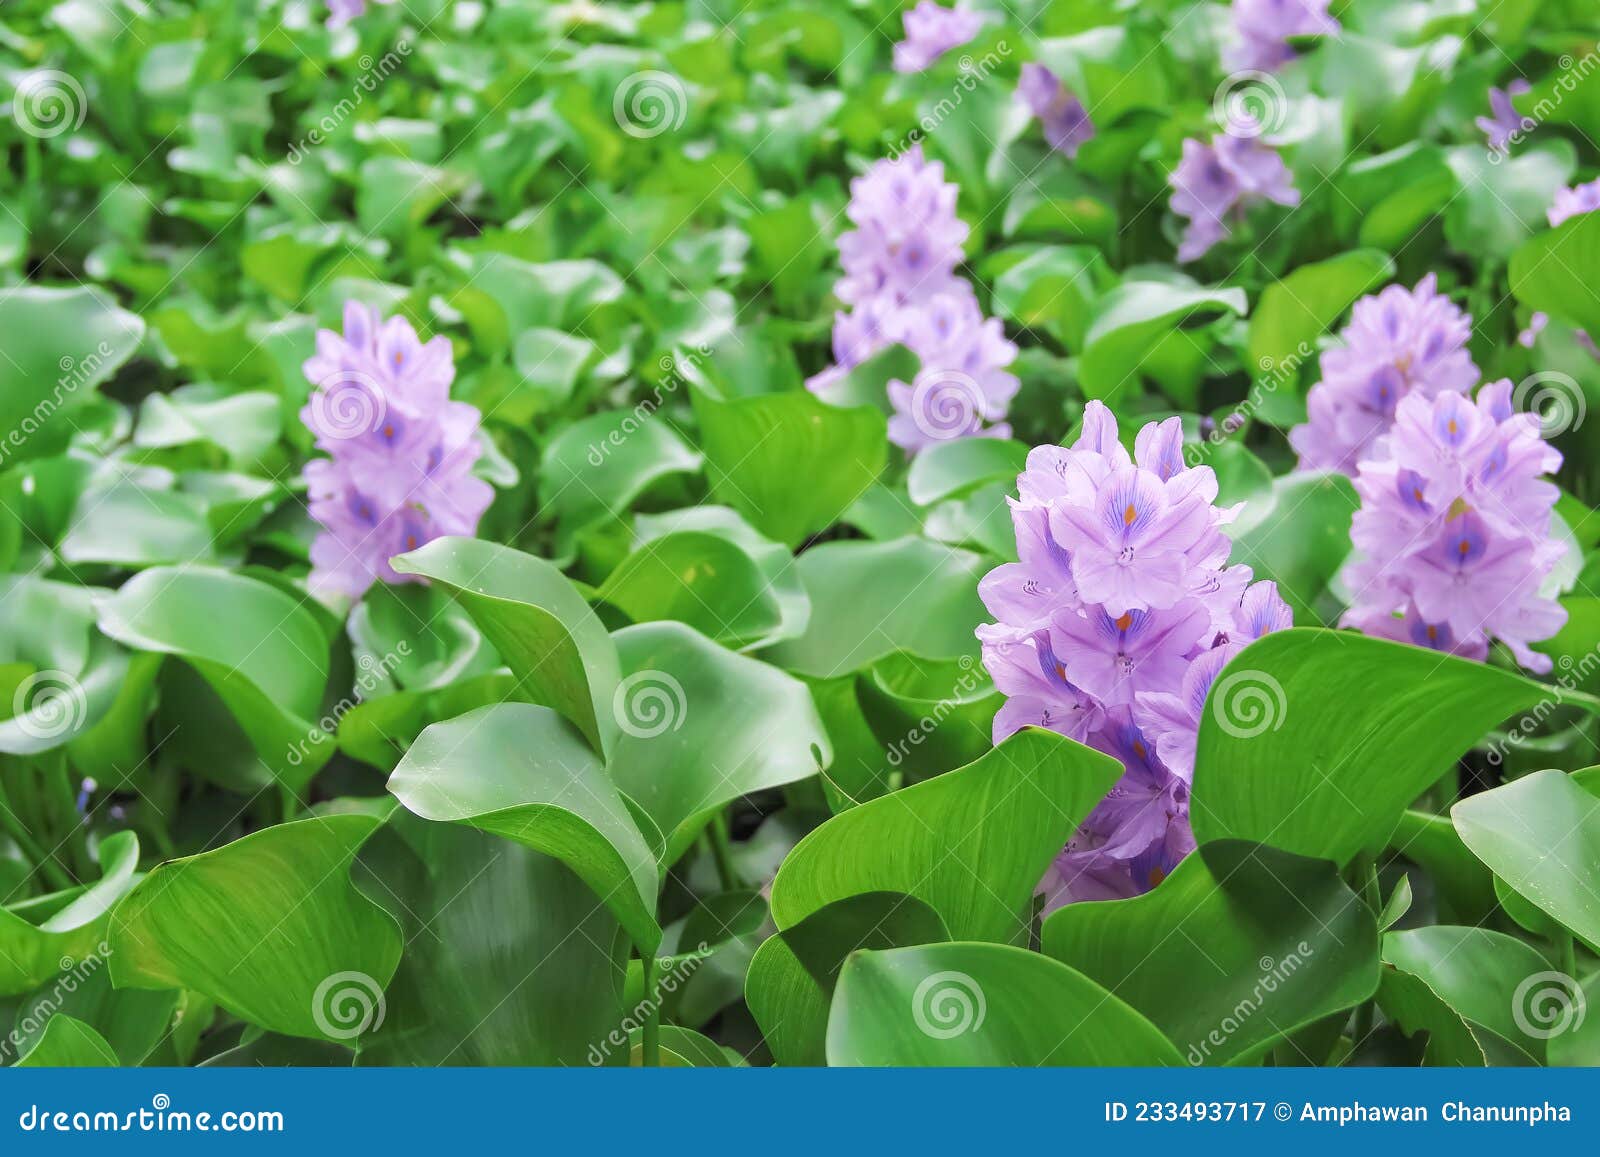 purple flower of floating water hyacinth eichornia crassipes in the river